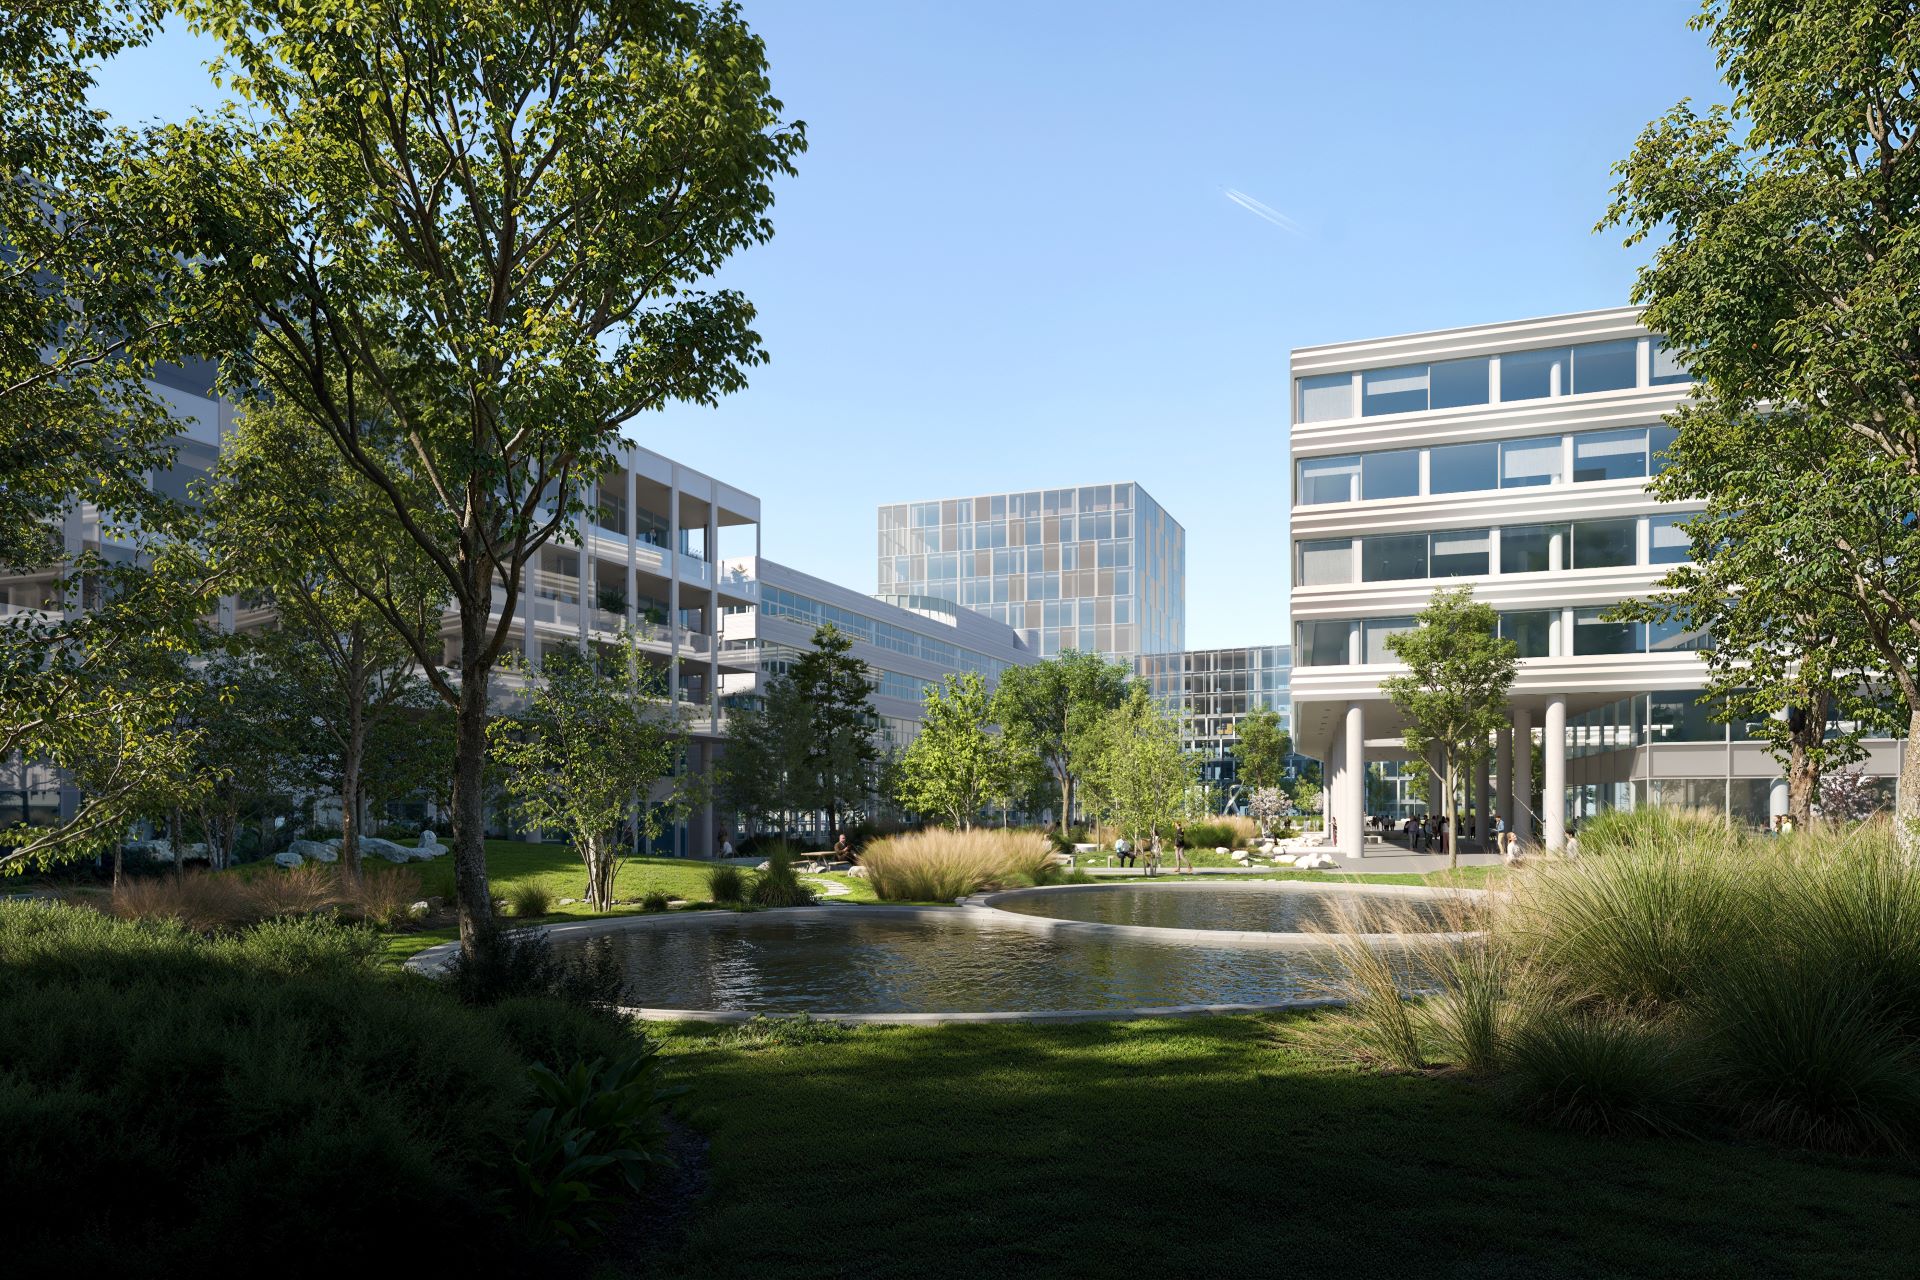 HOP Technology Office Park, owned by WING, to be redeveloped as a technology office park